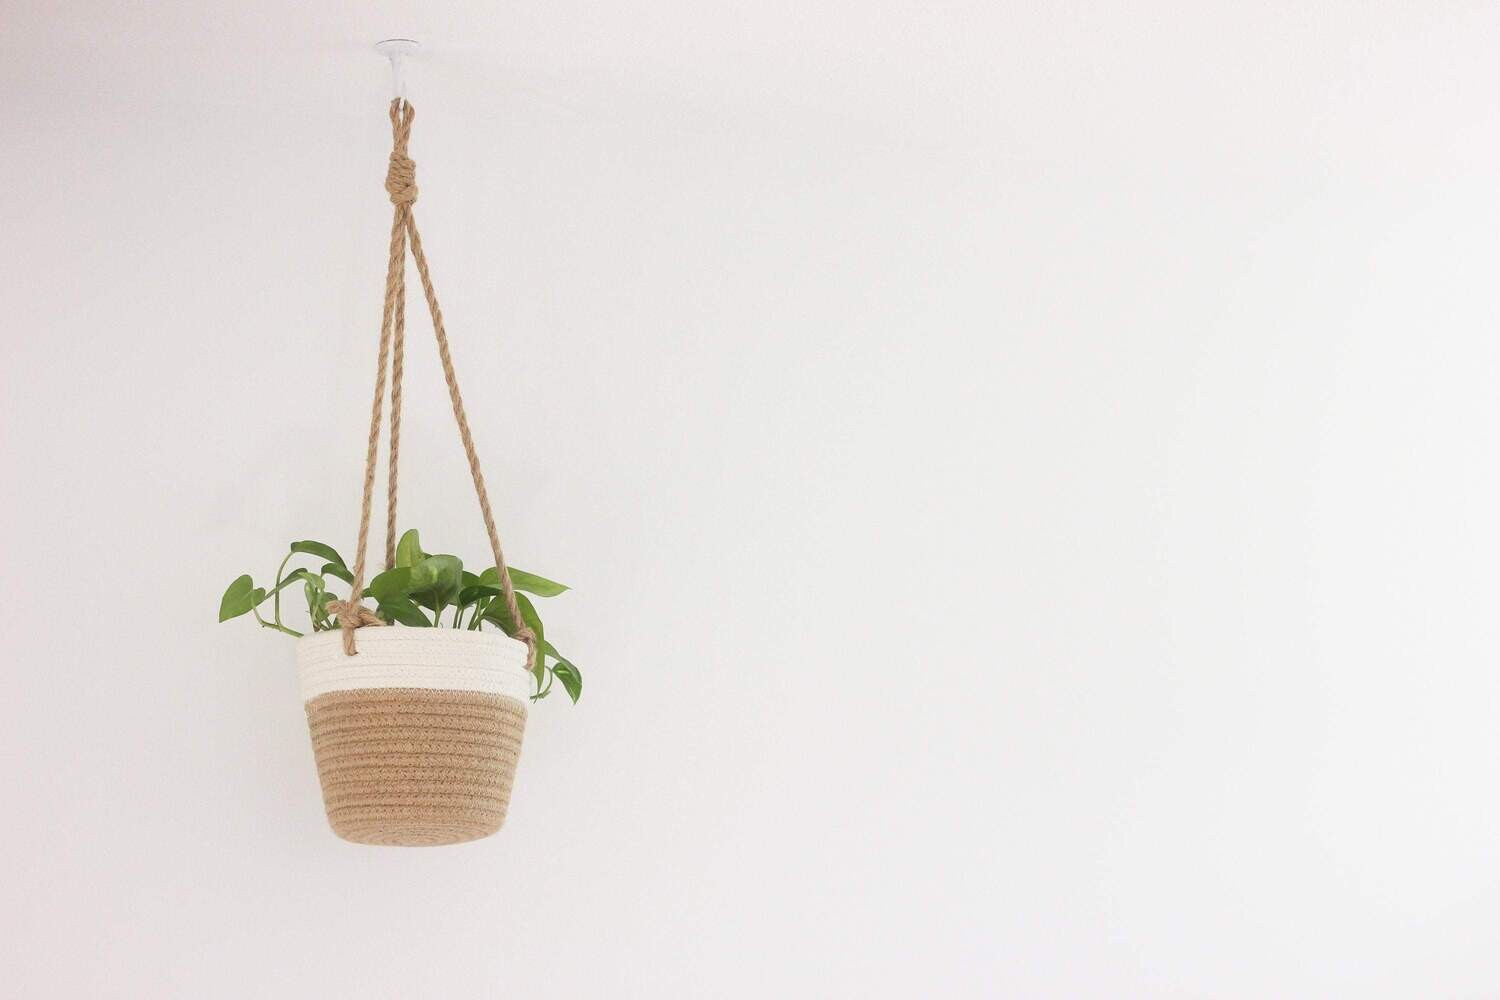 Beige and White Cotton Rope Hanging Planter Basket 7"